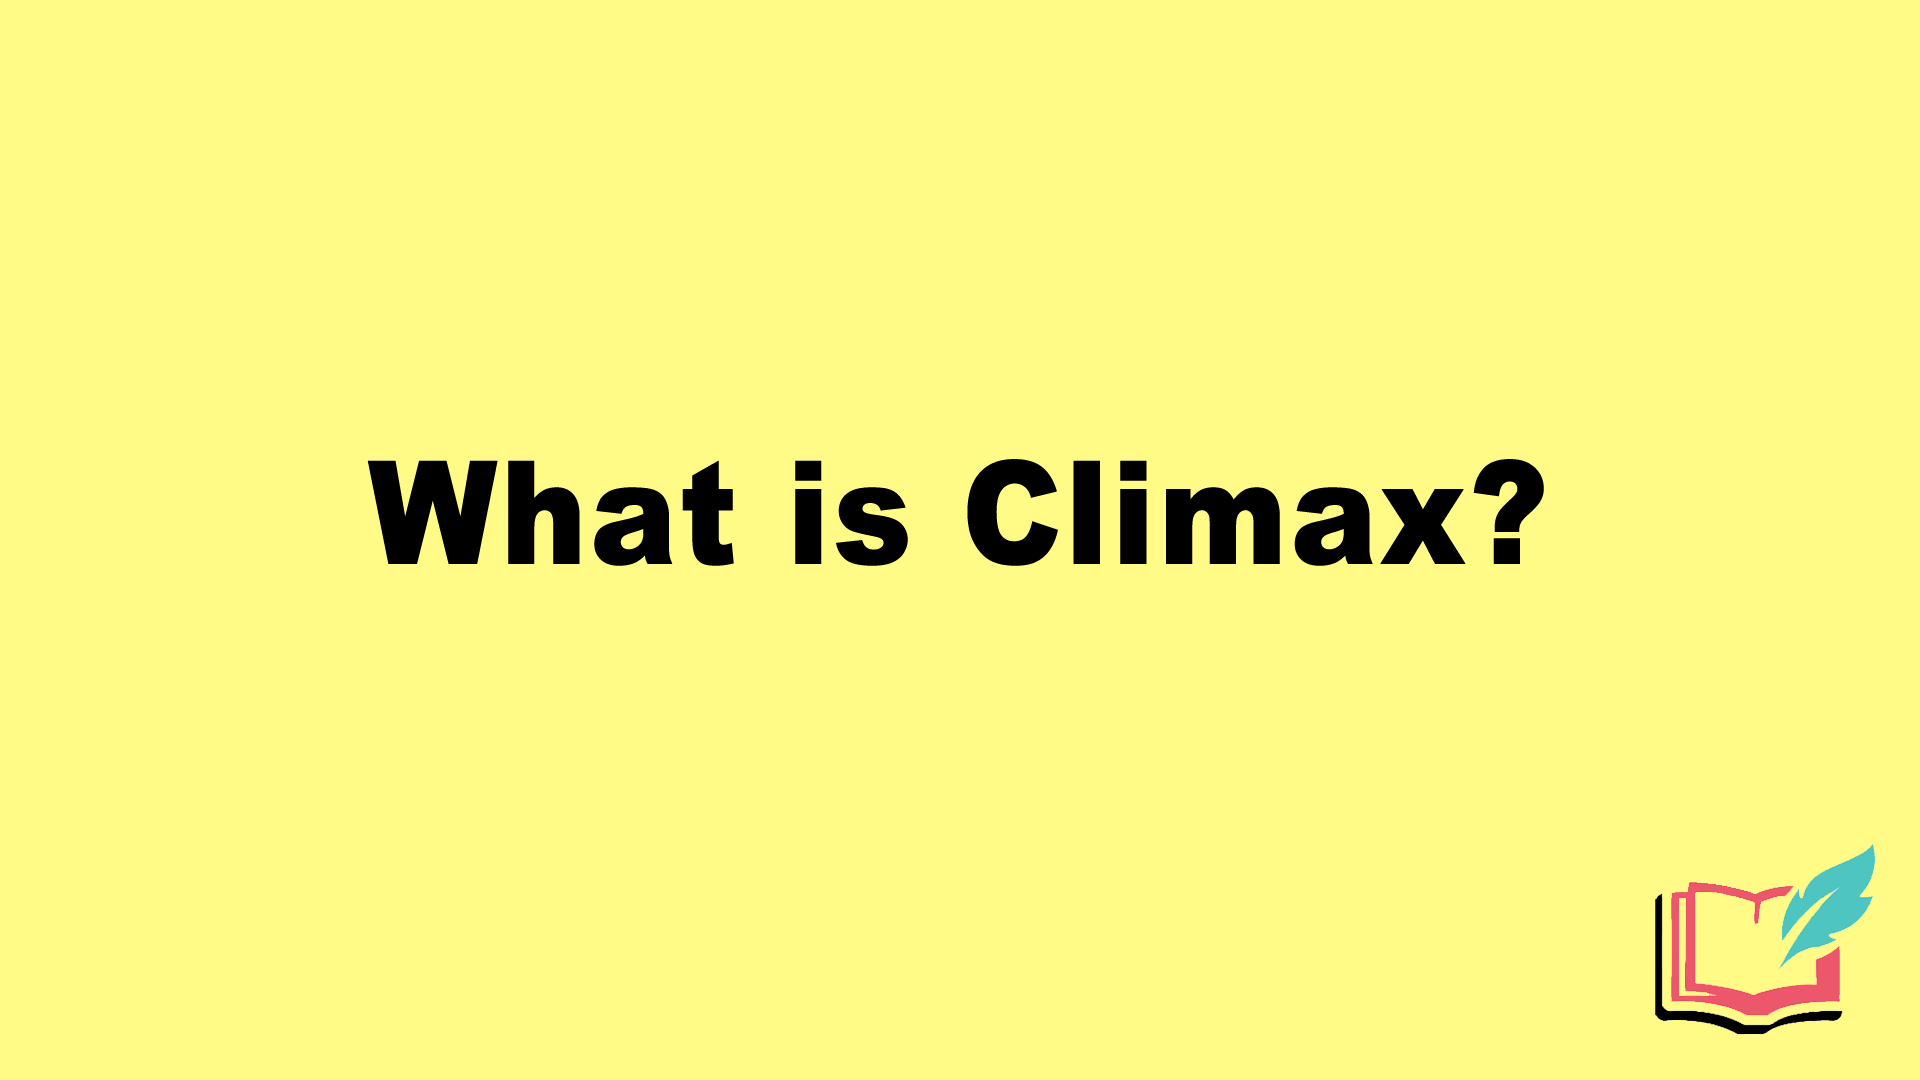 climax as a literary device